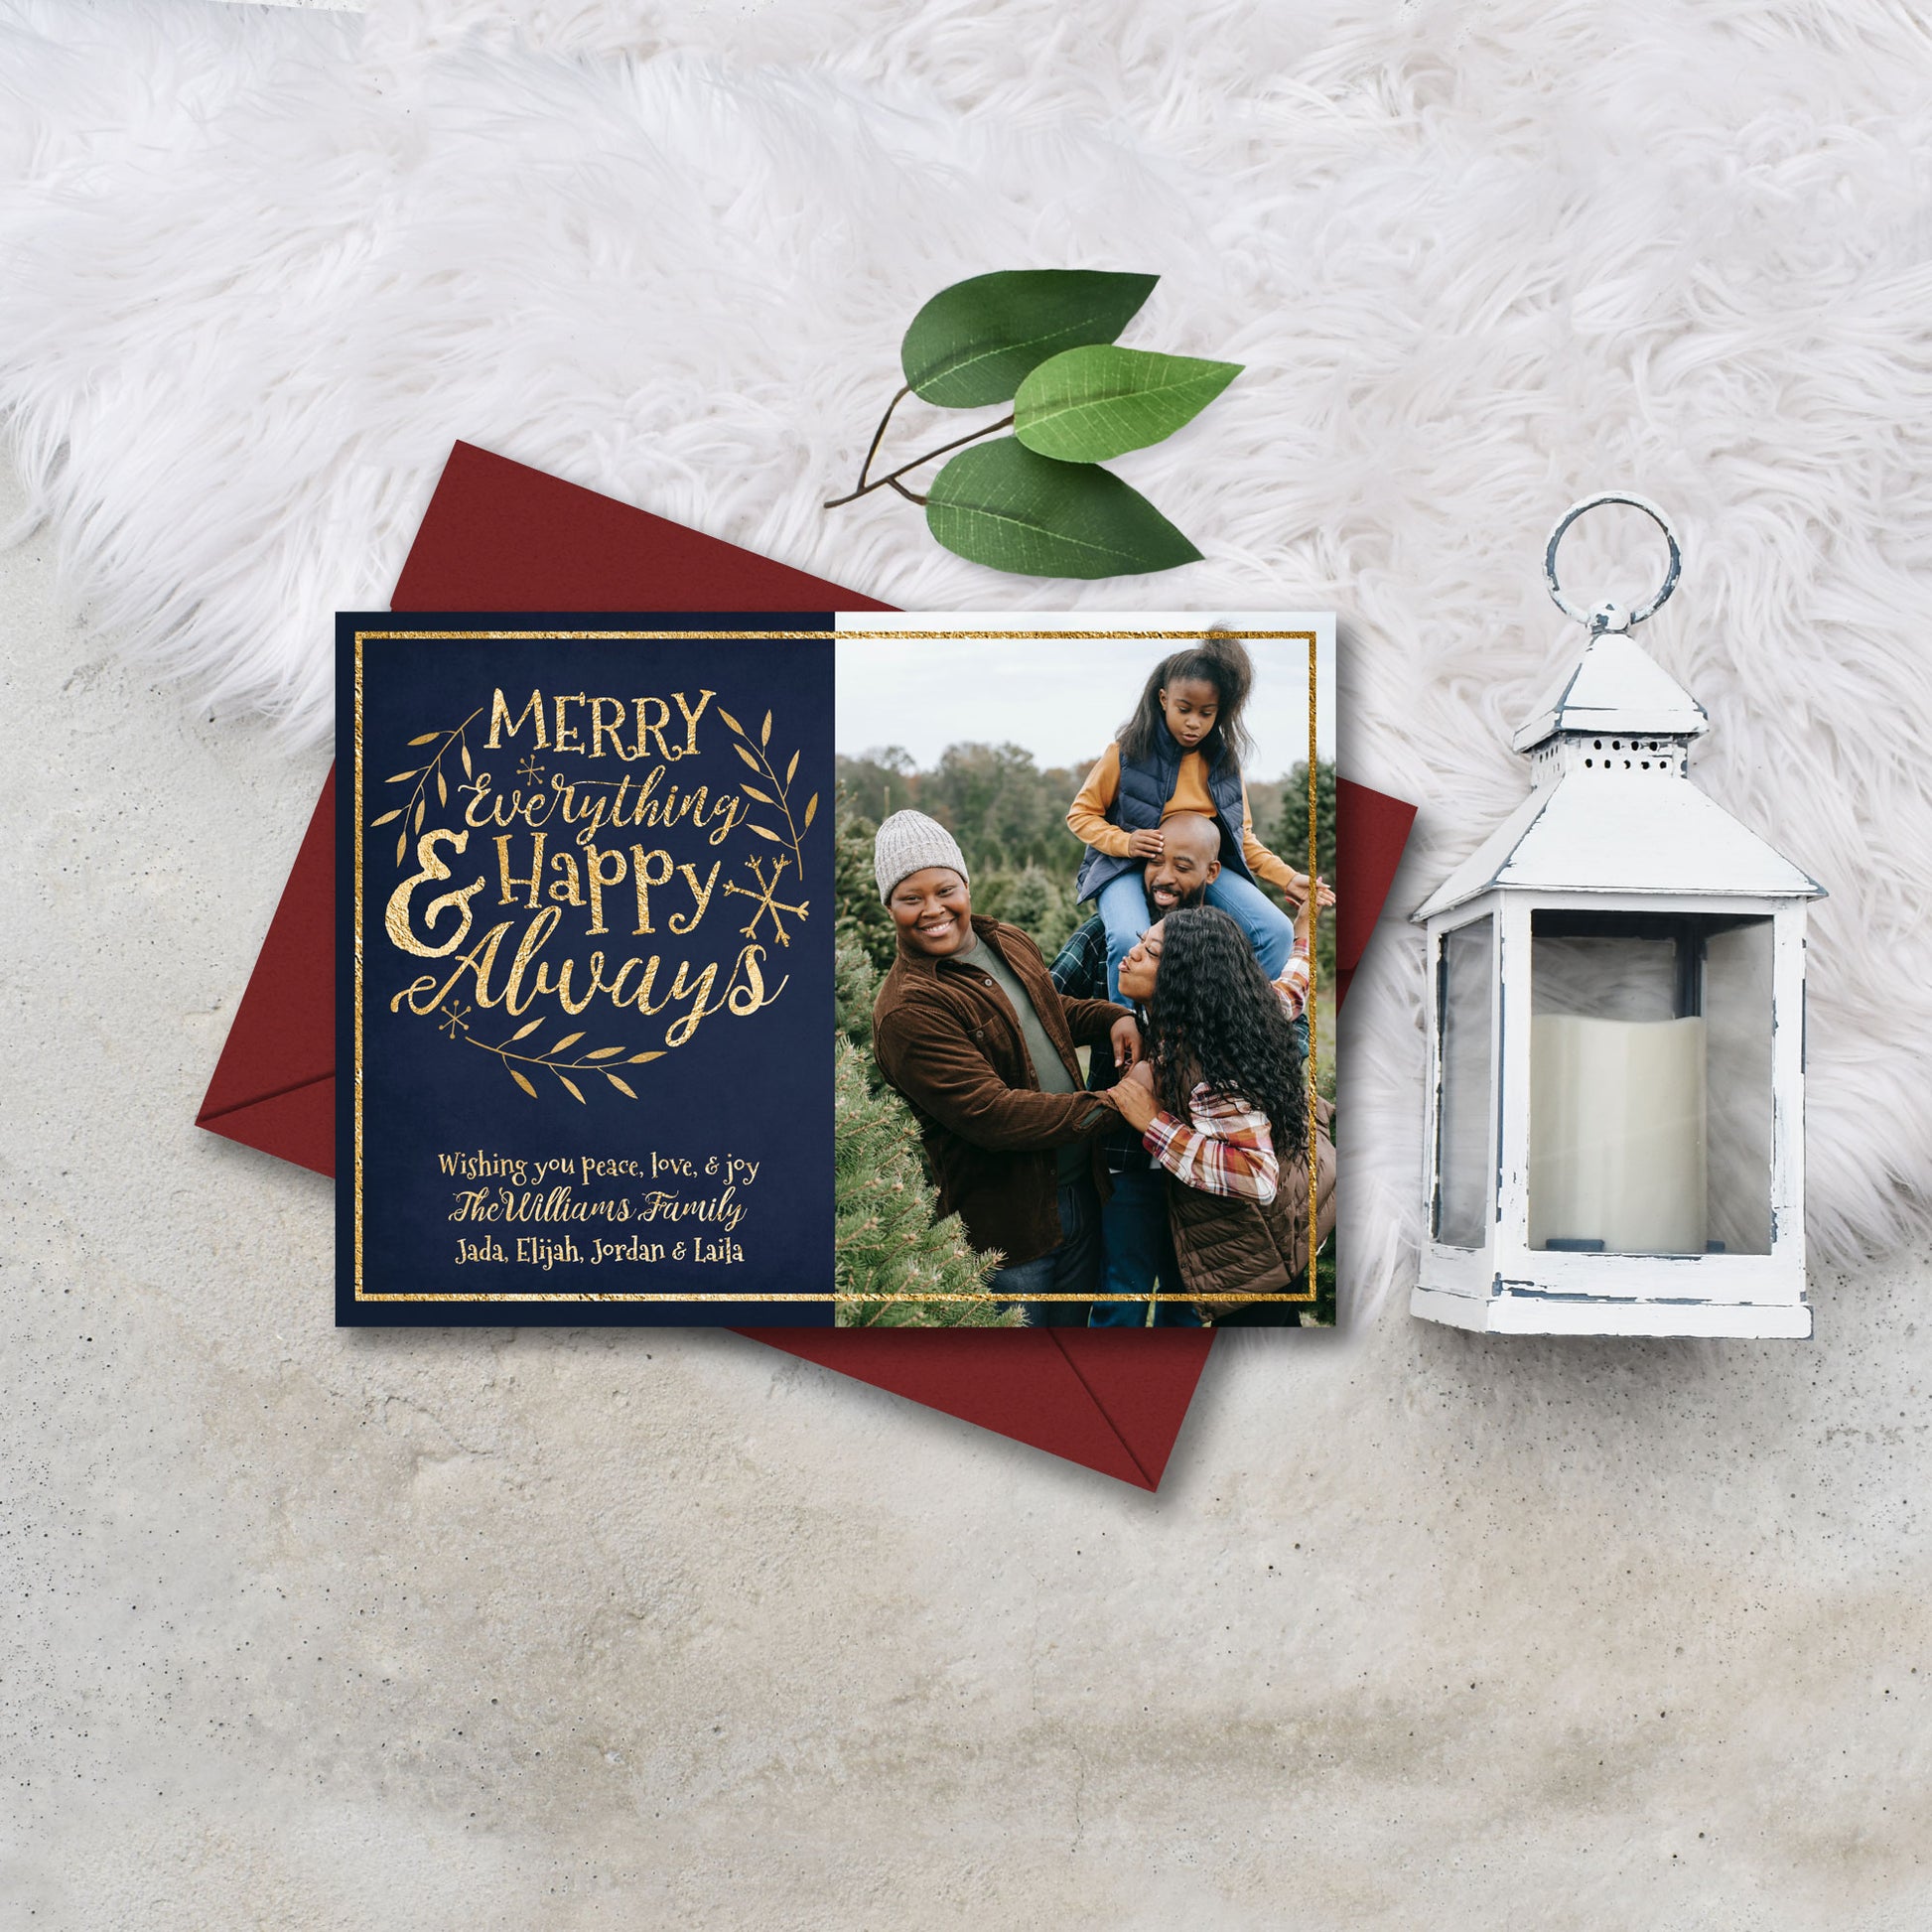 Merry Everything Holiday Photo Card Template by Playful Pixie Studio